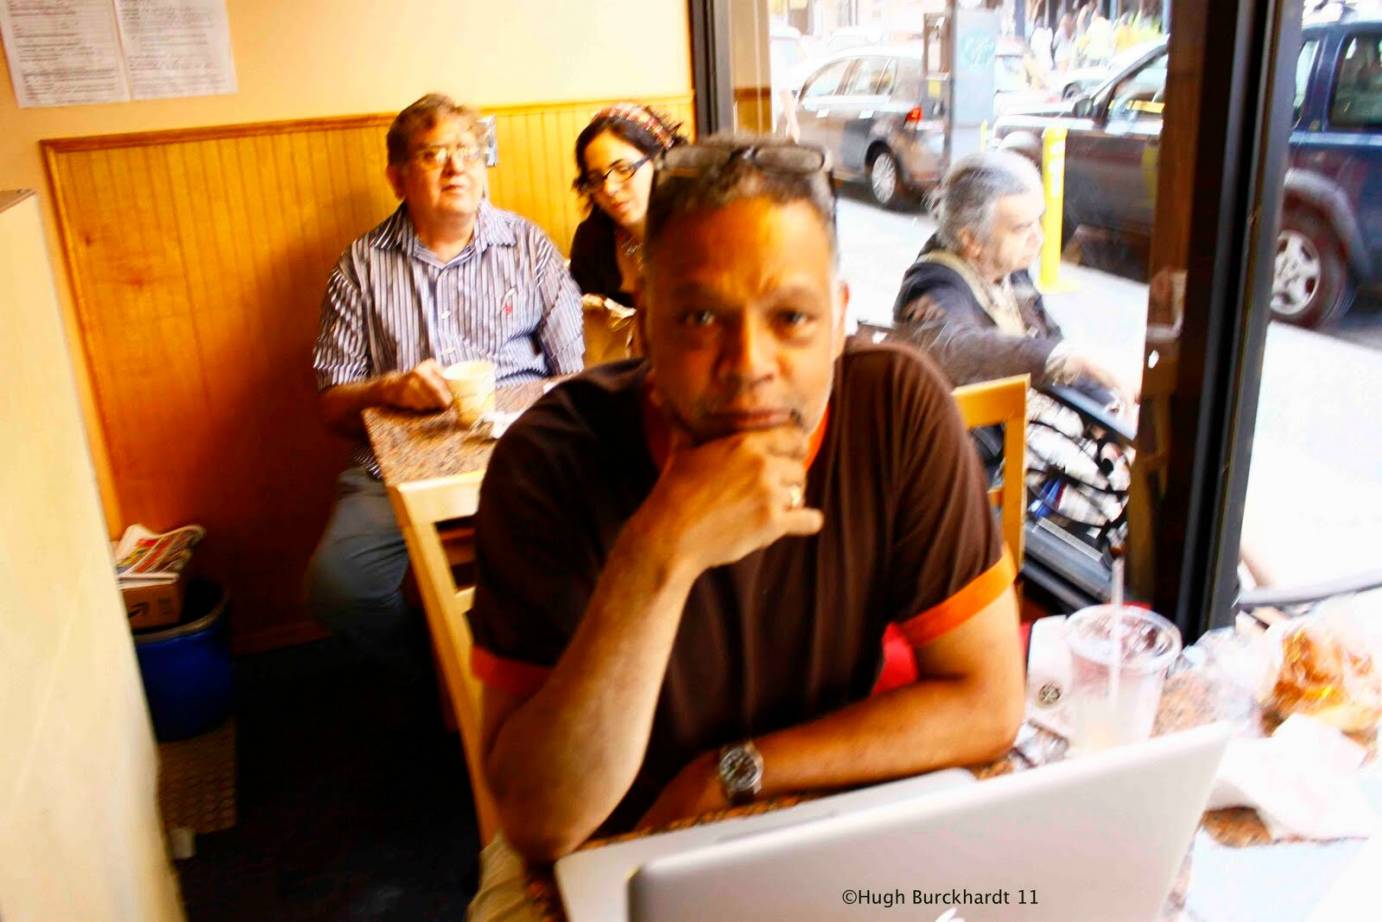 Ishmael Houston-Jones working on a laptop at a New York coffee shop.